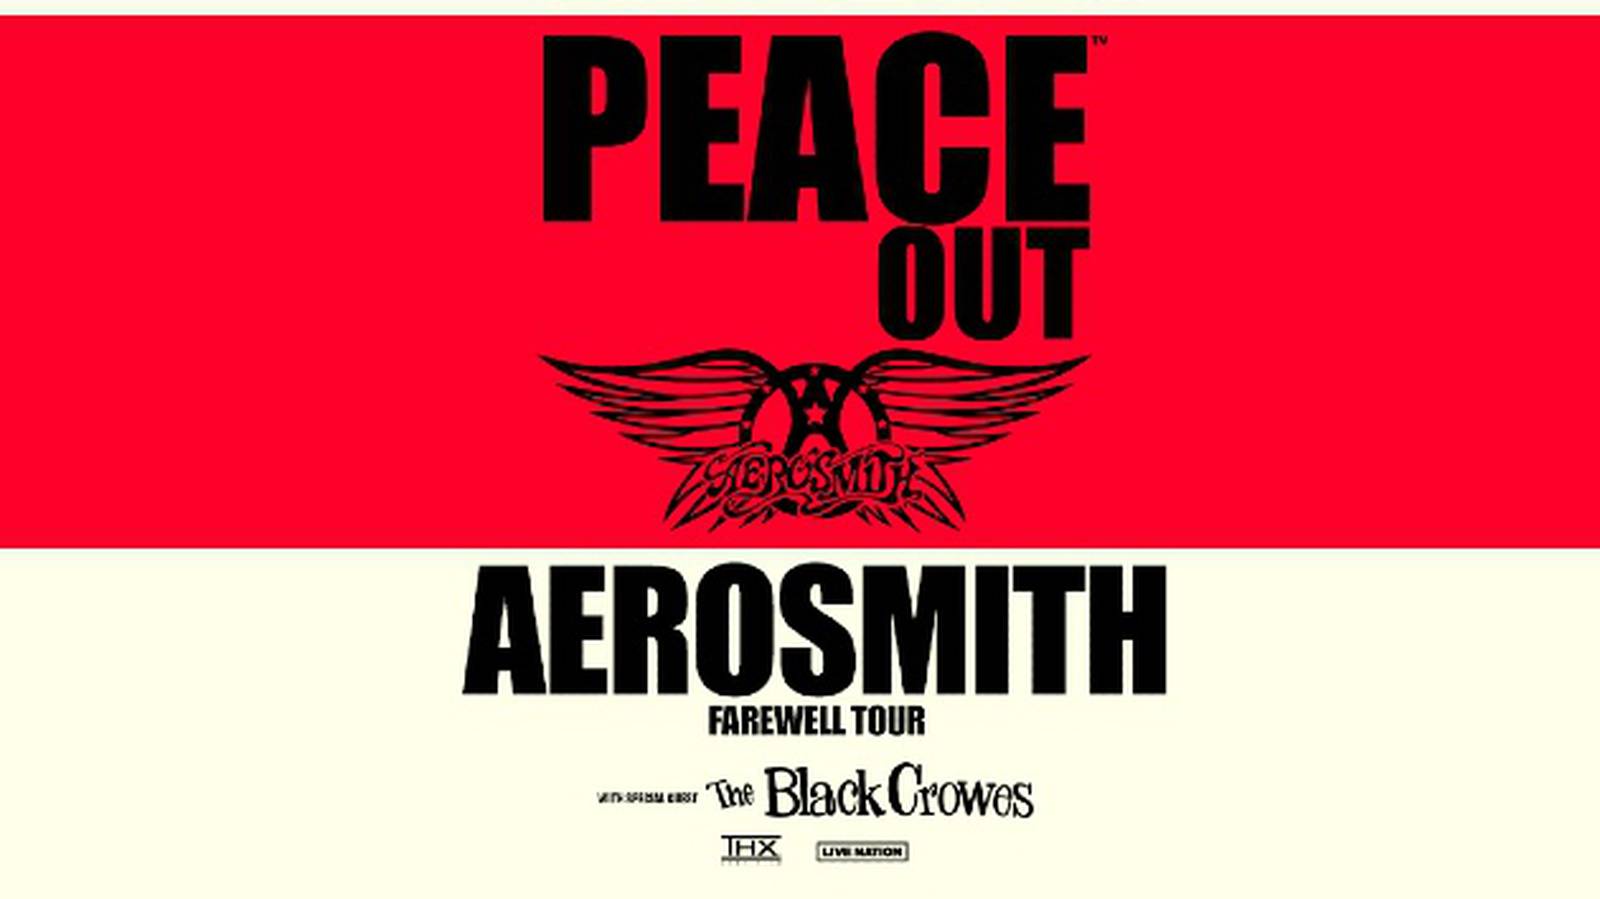 Aerosmith announces rescheduled dates for their Peace Out tour 107.3